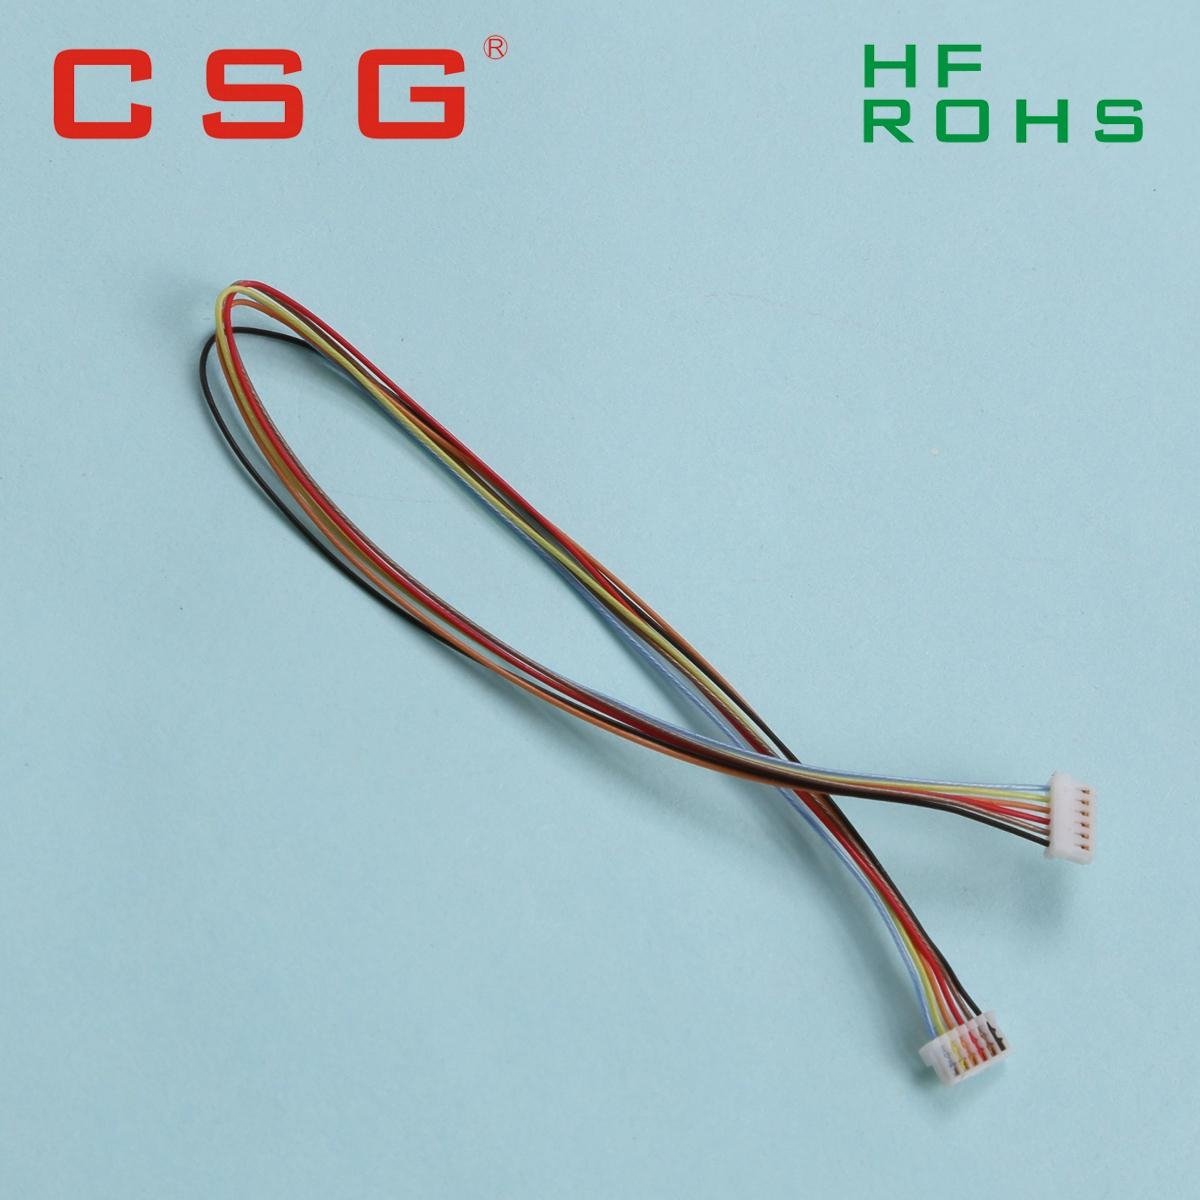 0.8mm Pitch electrical wire splice connector 2